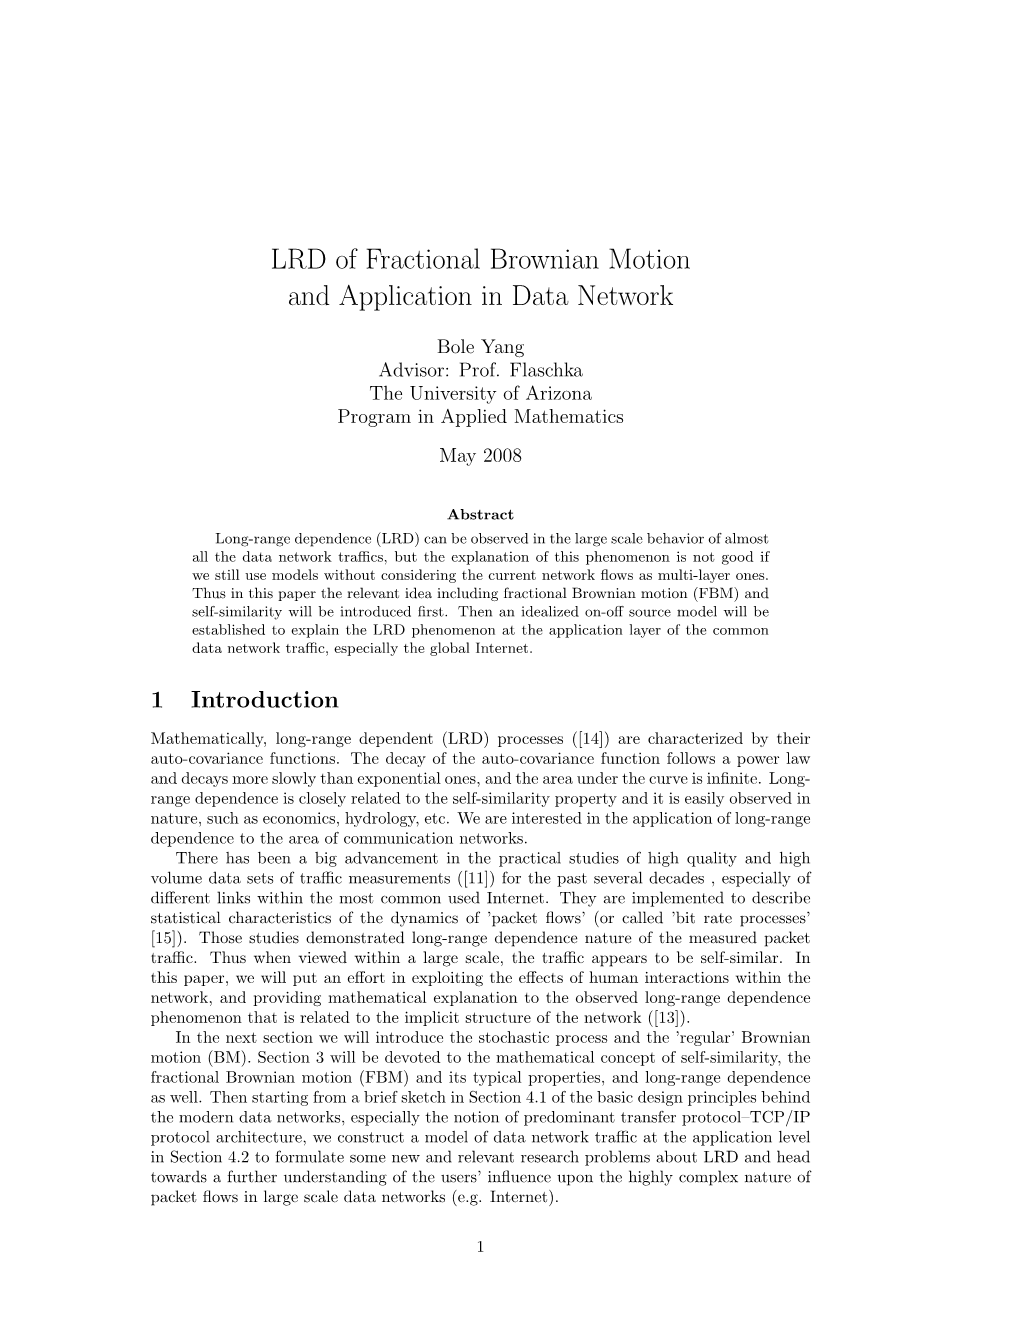 LRD of Fractional Brownian Motion and Application in Data Network